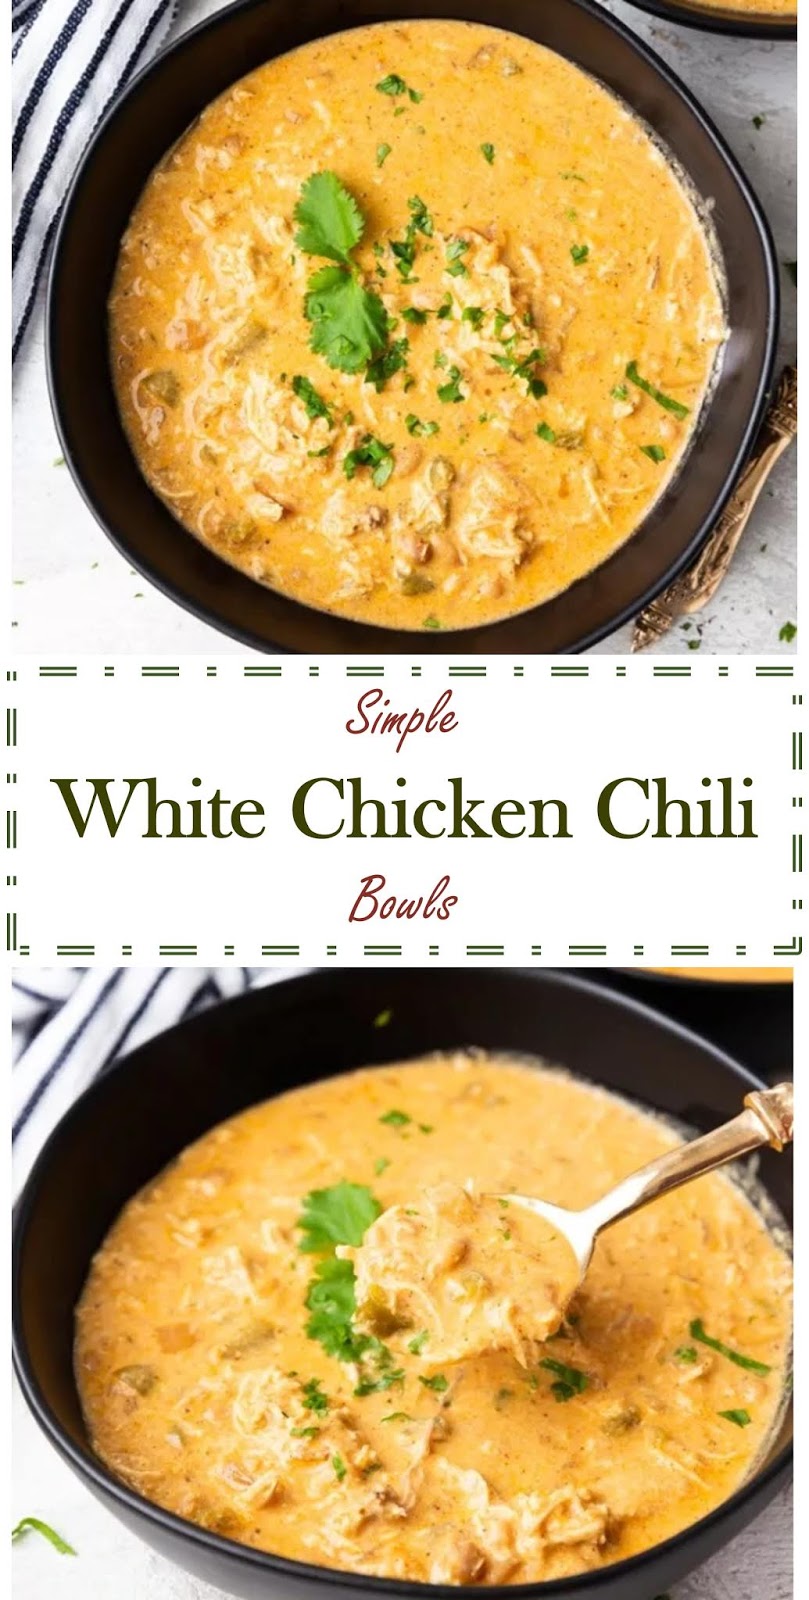 2176 Reviews: My BEST #Recipes >> Simple White #Chicken Chili Bowls - ...